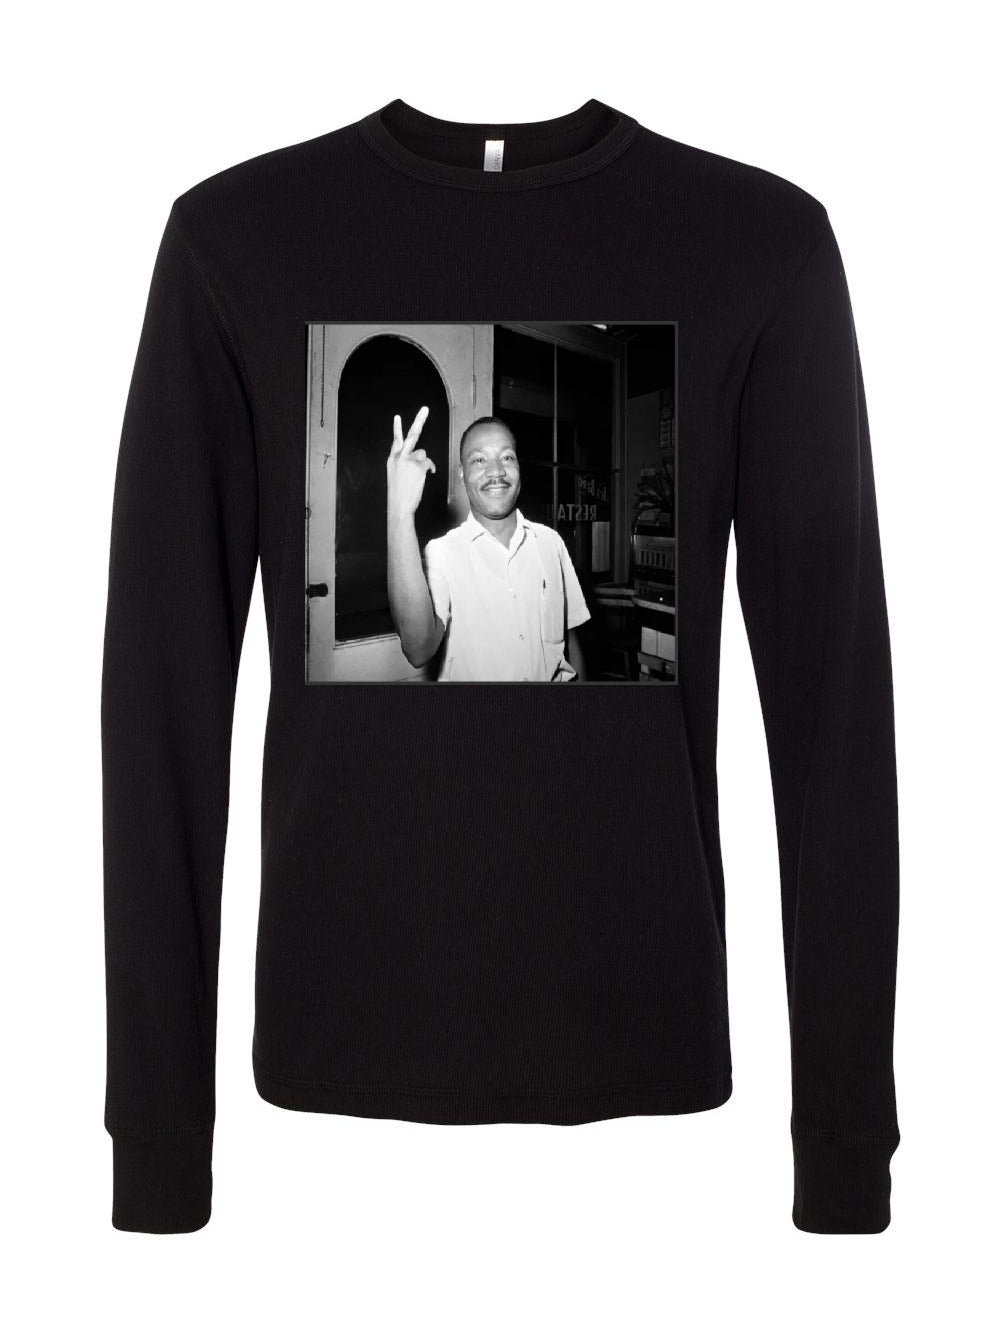 Martin Luther King Jr. Peace Picture Shirt